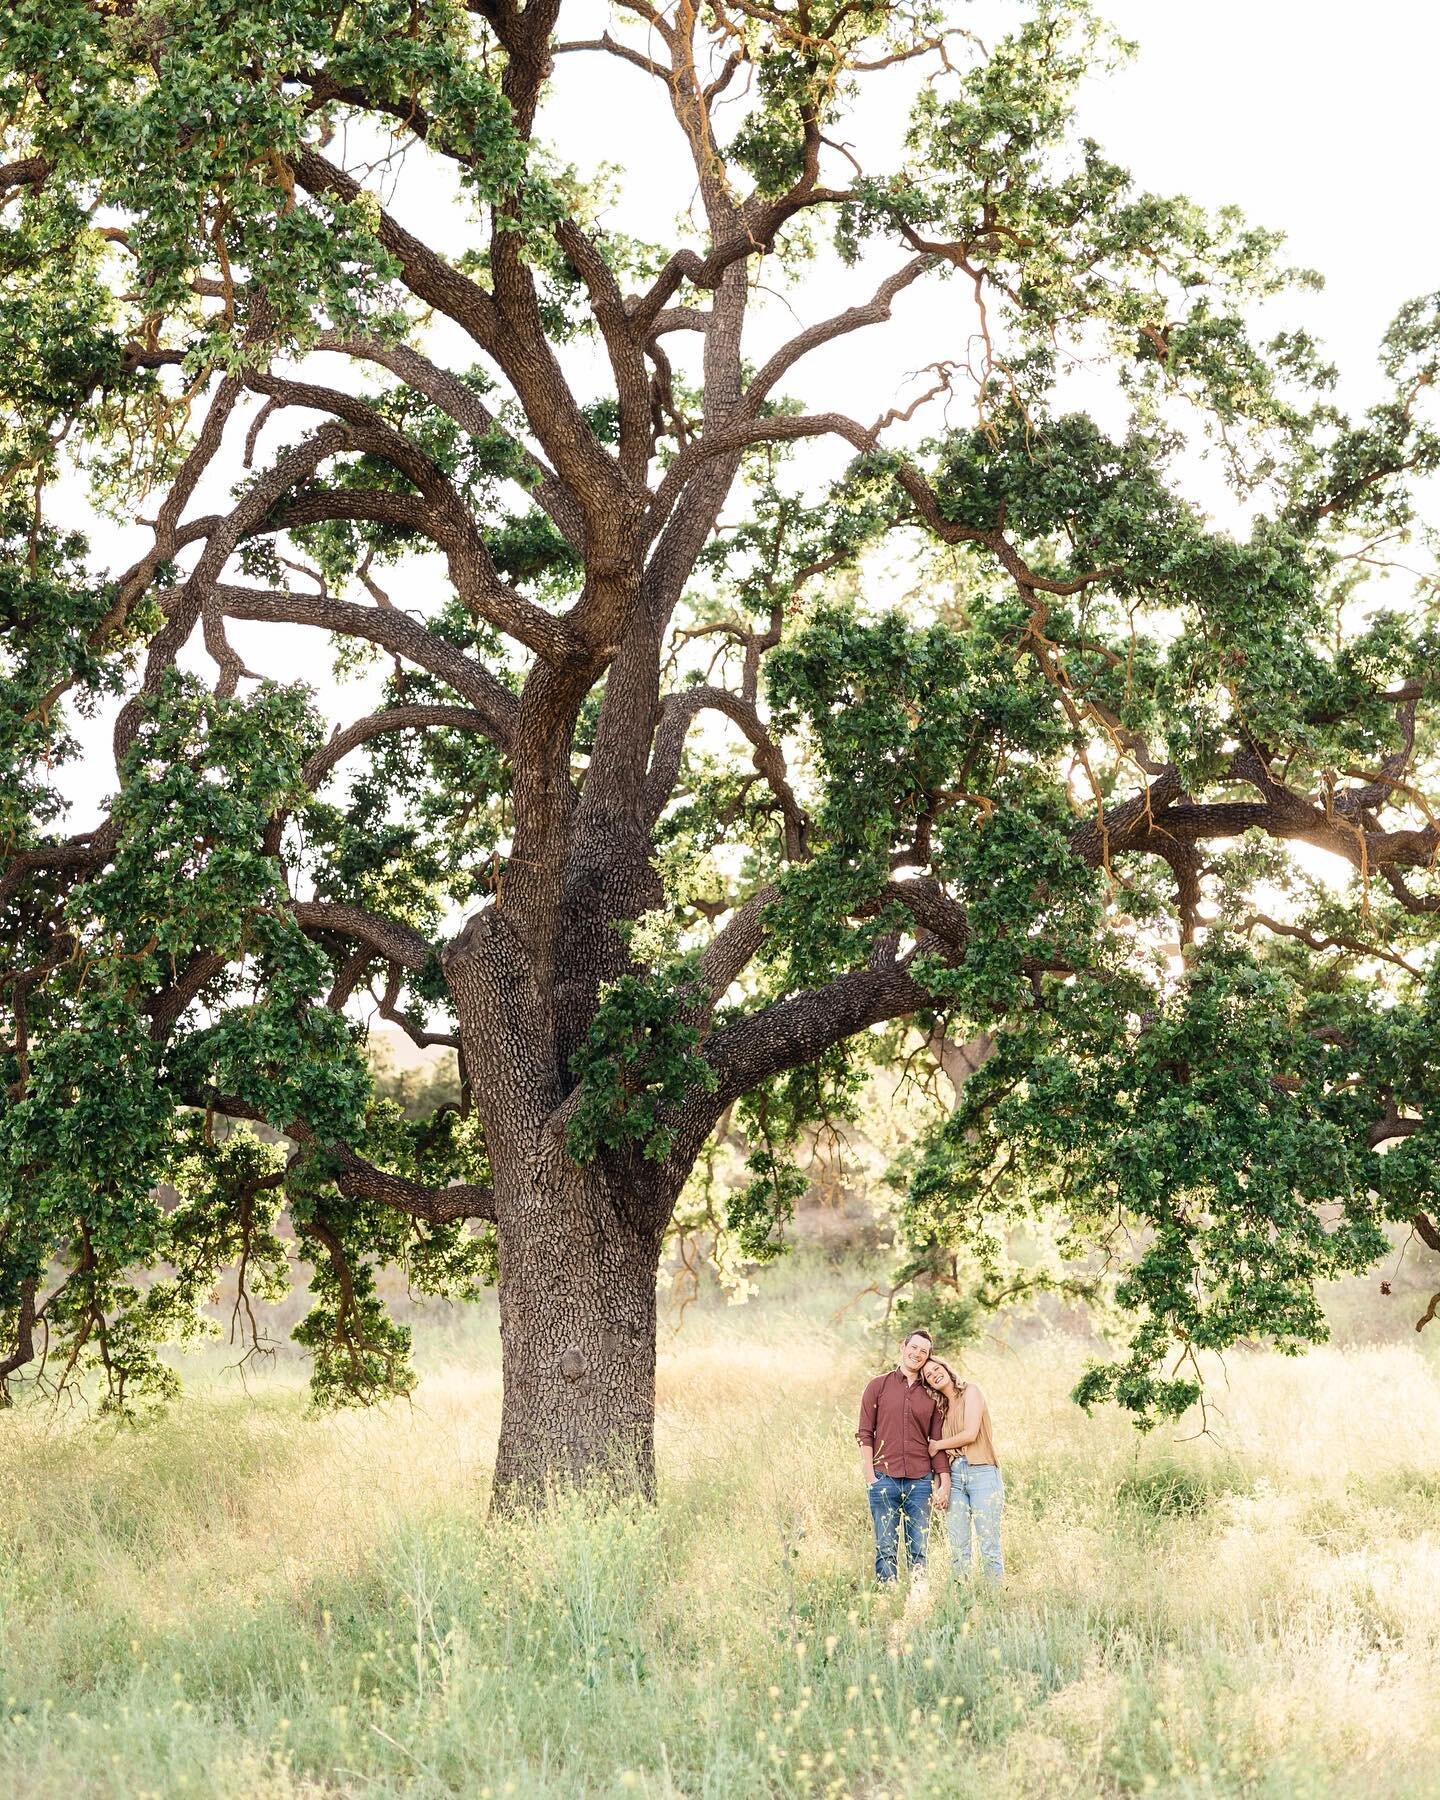 Headed to Paso Robles today for Chris &amp; Mikaela's wedding weekend! I love that we took most of their engagement photos under this gorgeous giant oak, and tomorrow they're getting married under another one! 🌳🤍